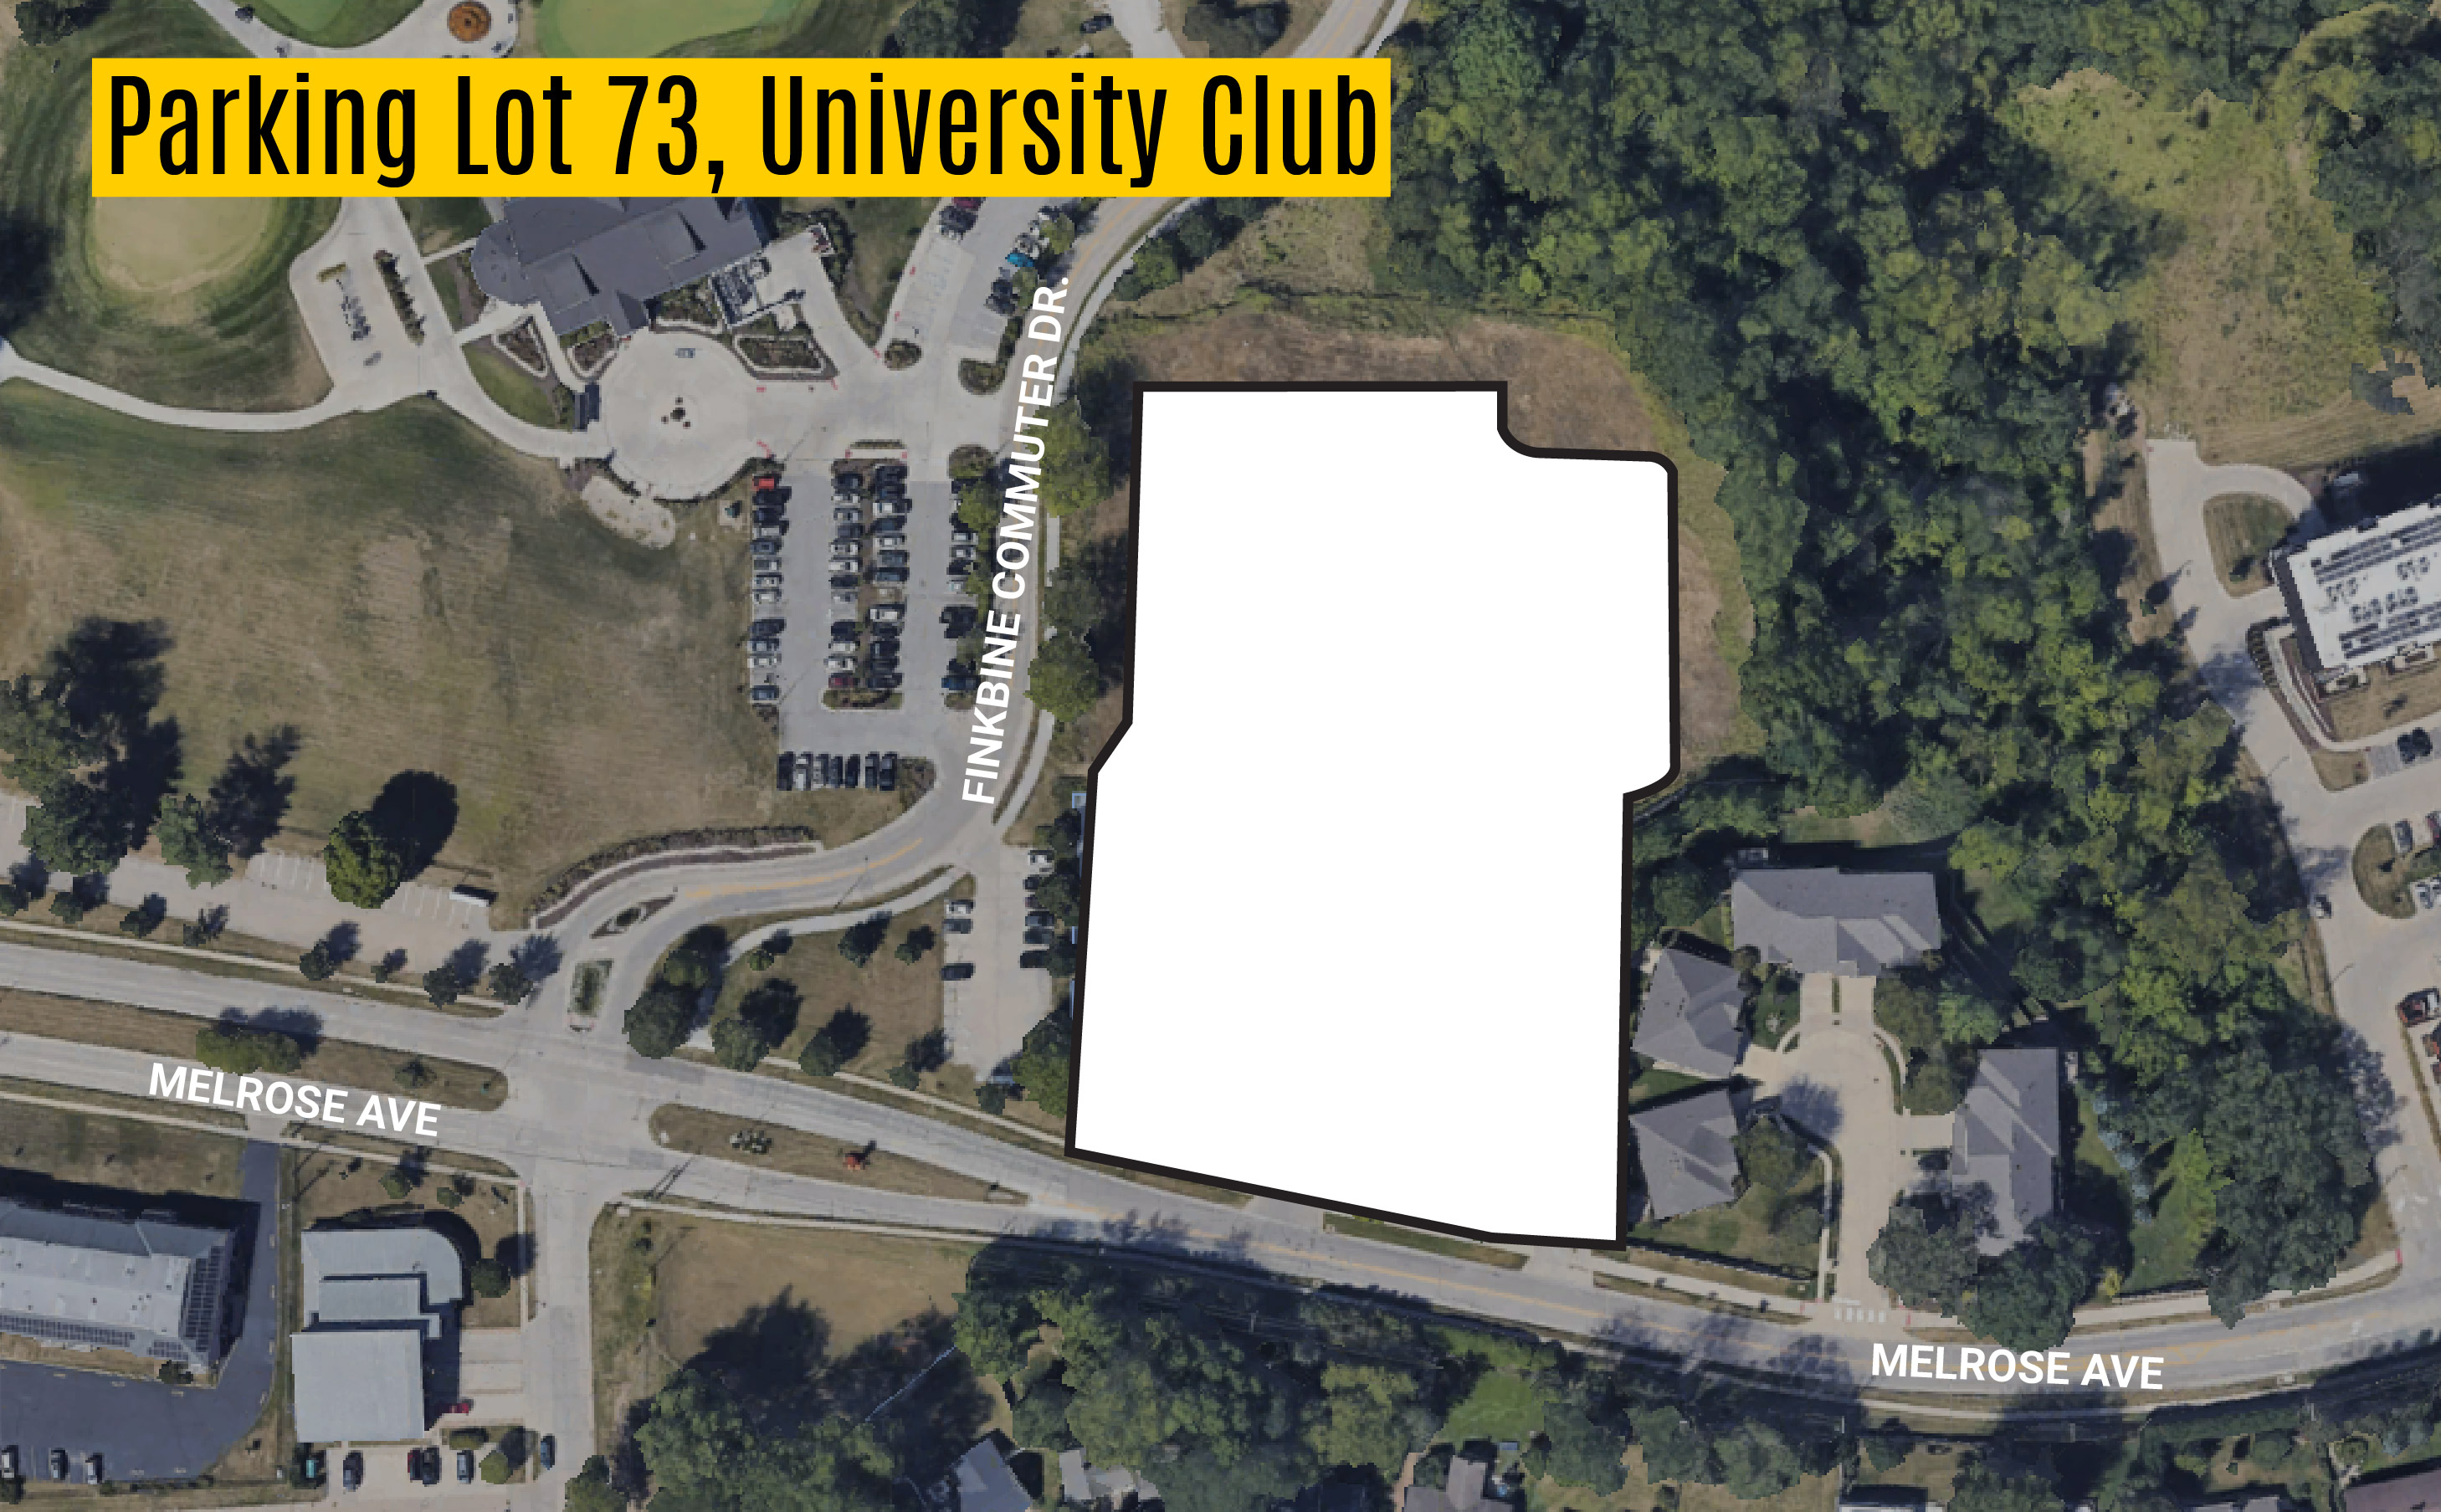 A map showing the layout and location of Parking Lot 73, University Club